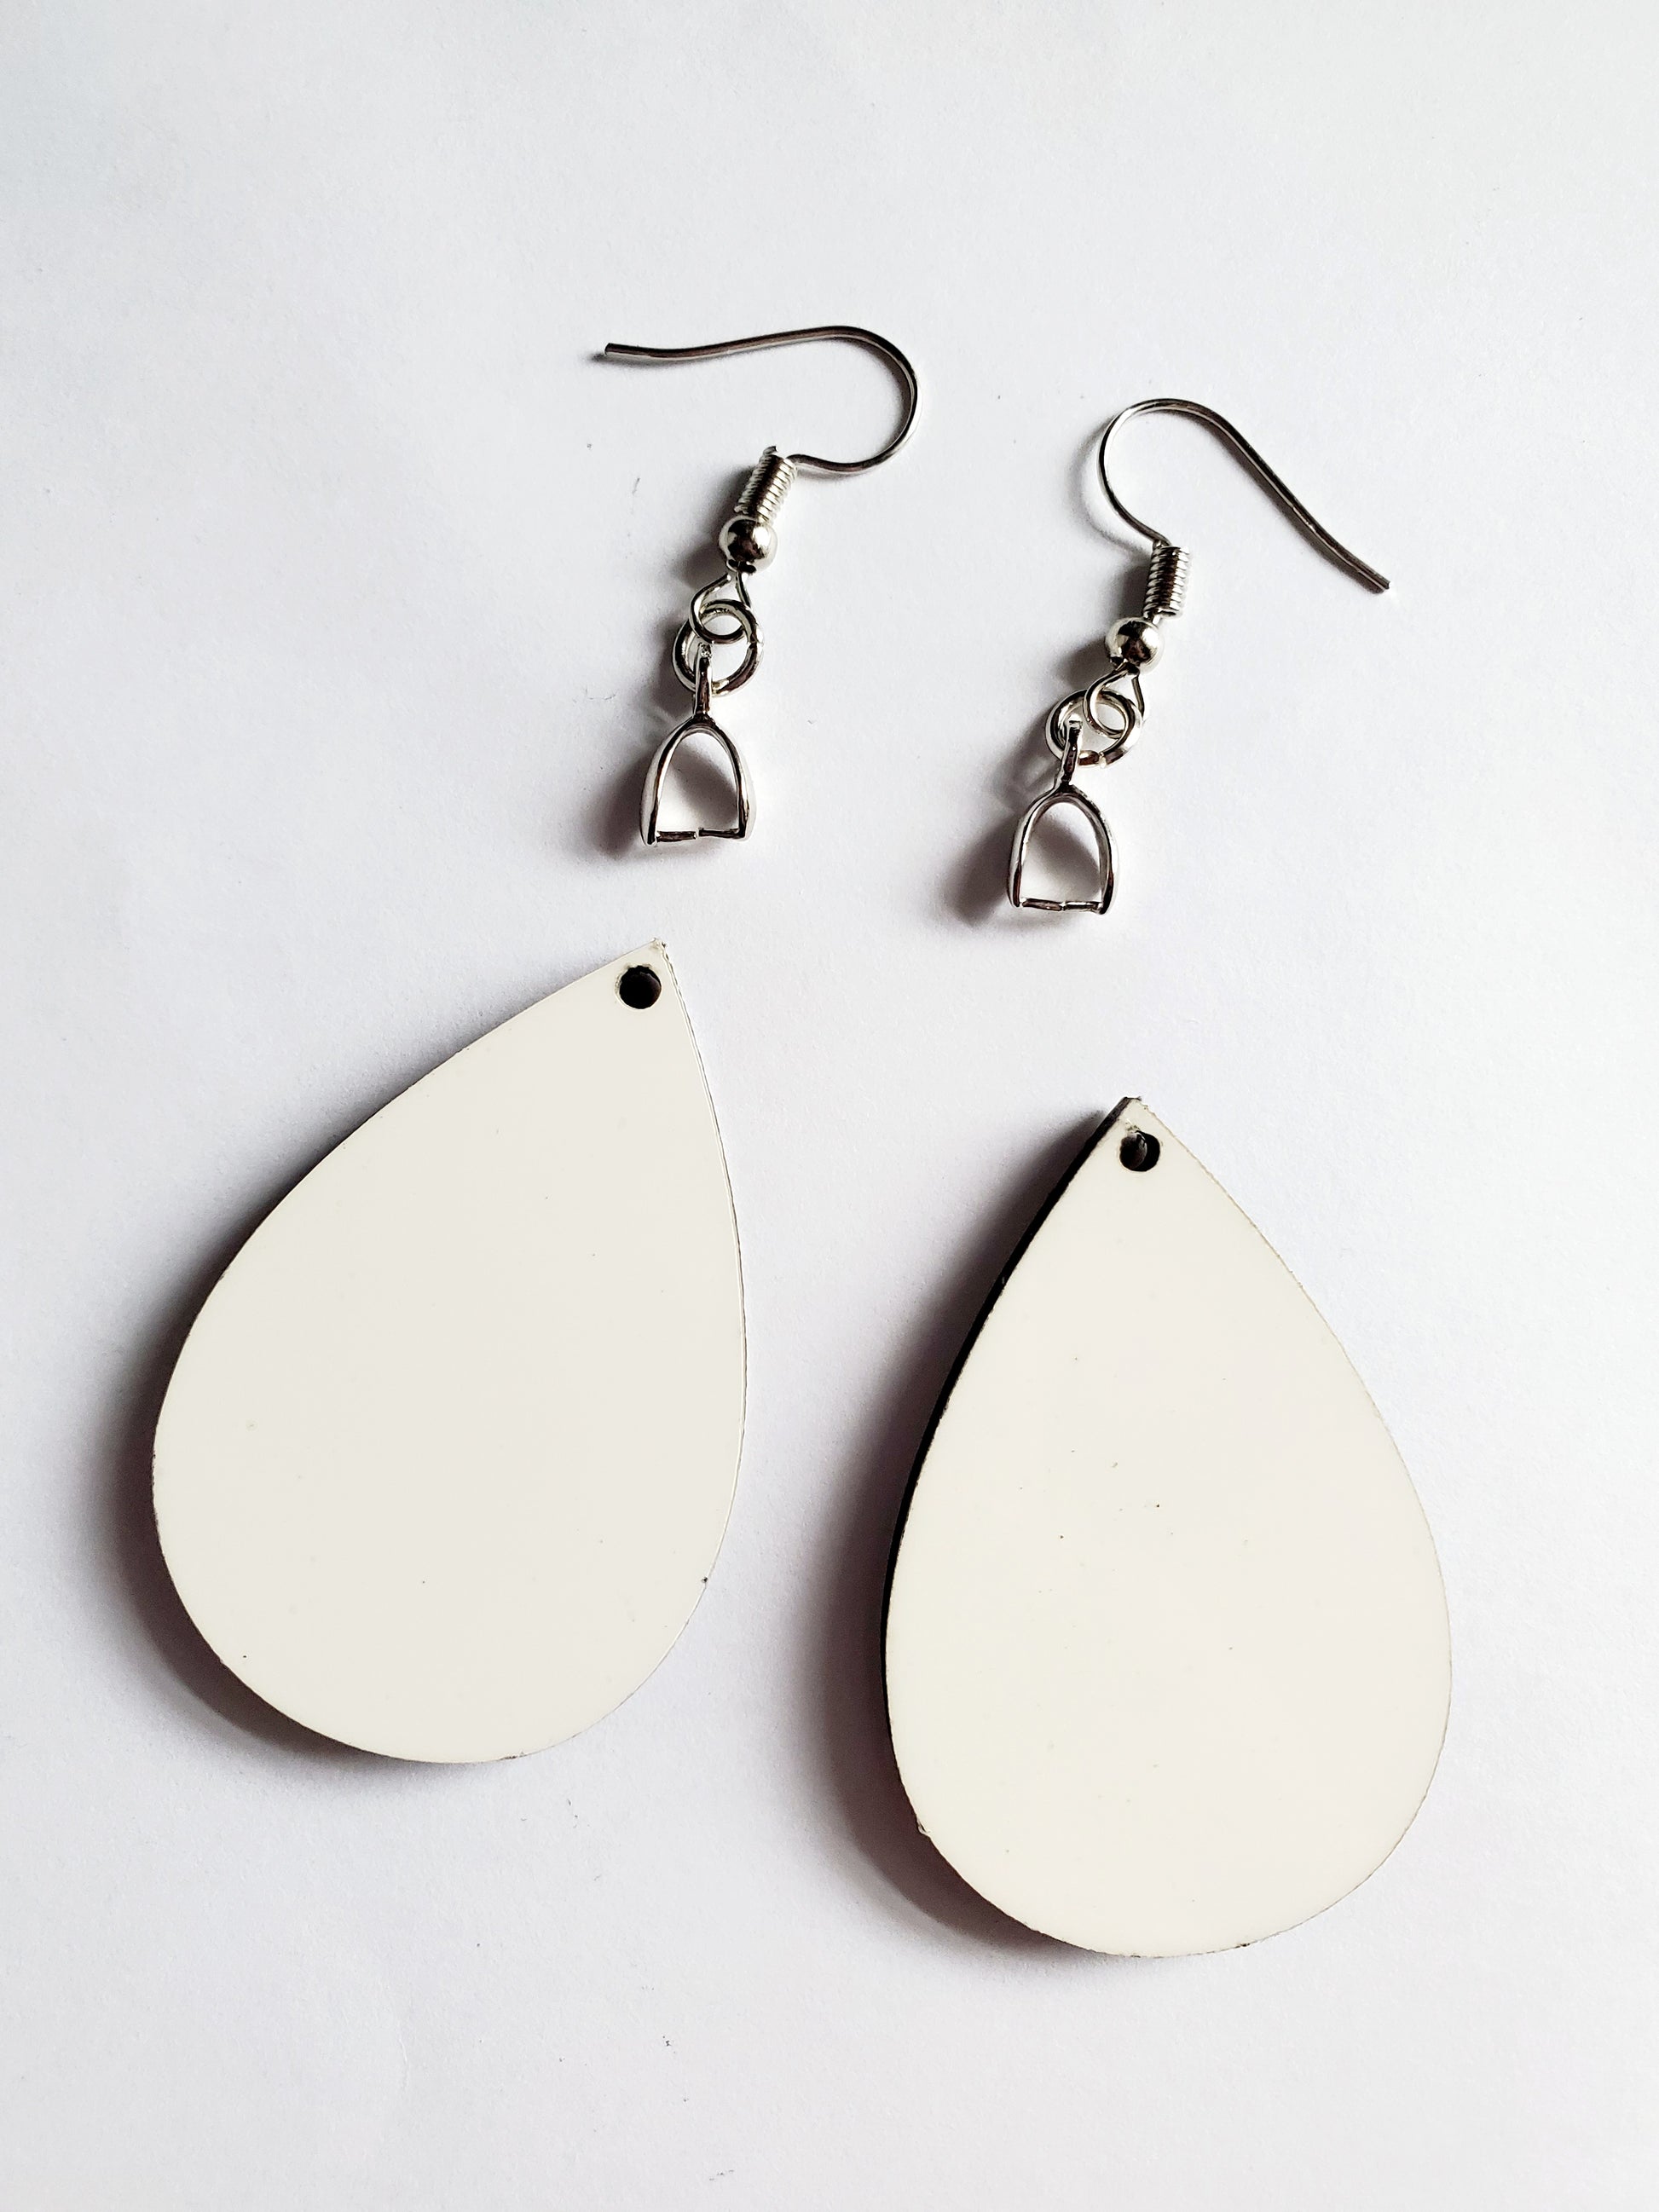 30 Pieces Sublimation Blank Earrings, Modacraft Sublimation Printing  Earrings Unfinished Teardrop Heat Transfer Earring Pendant with Earring  Hooks and